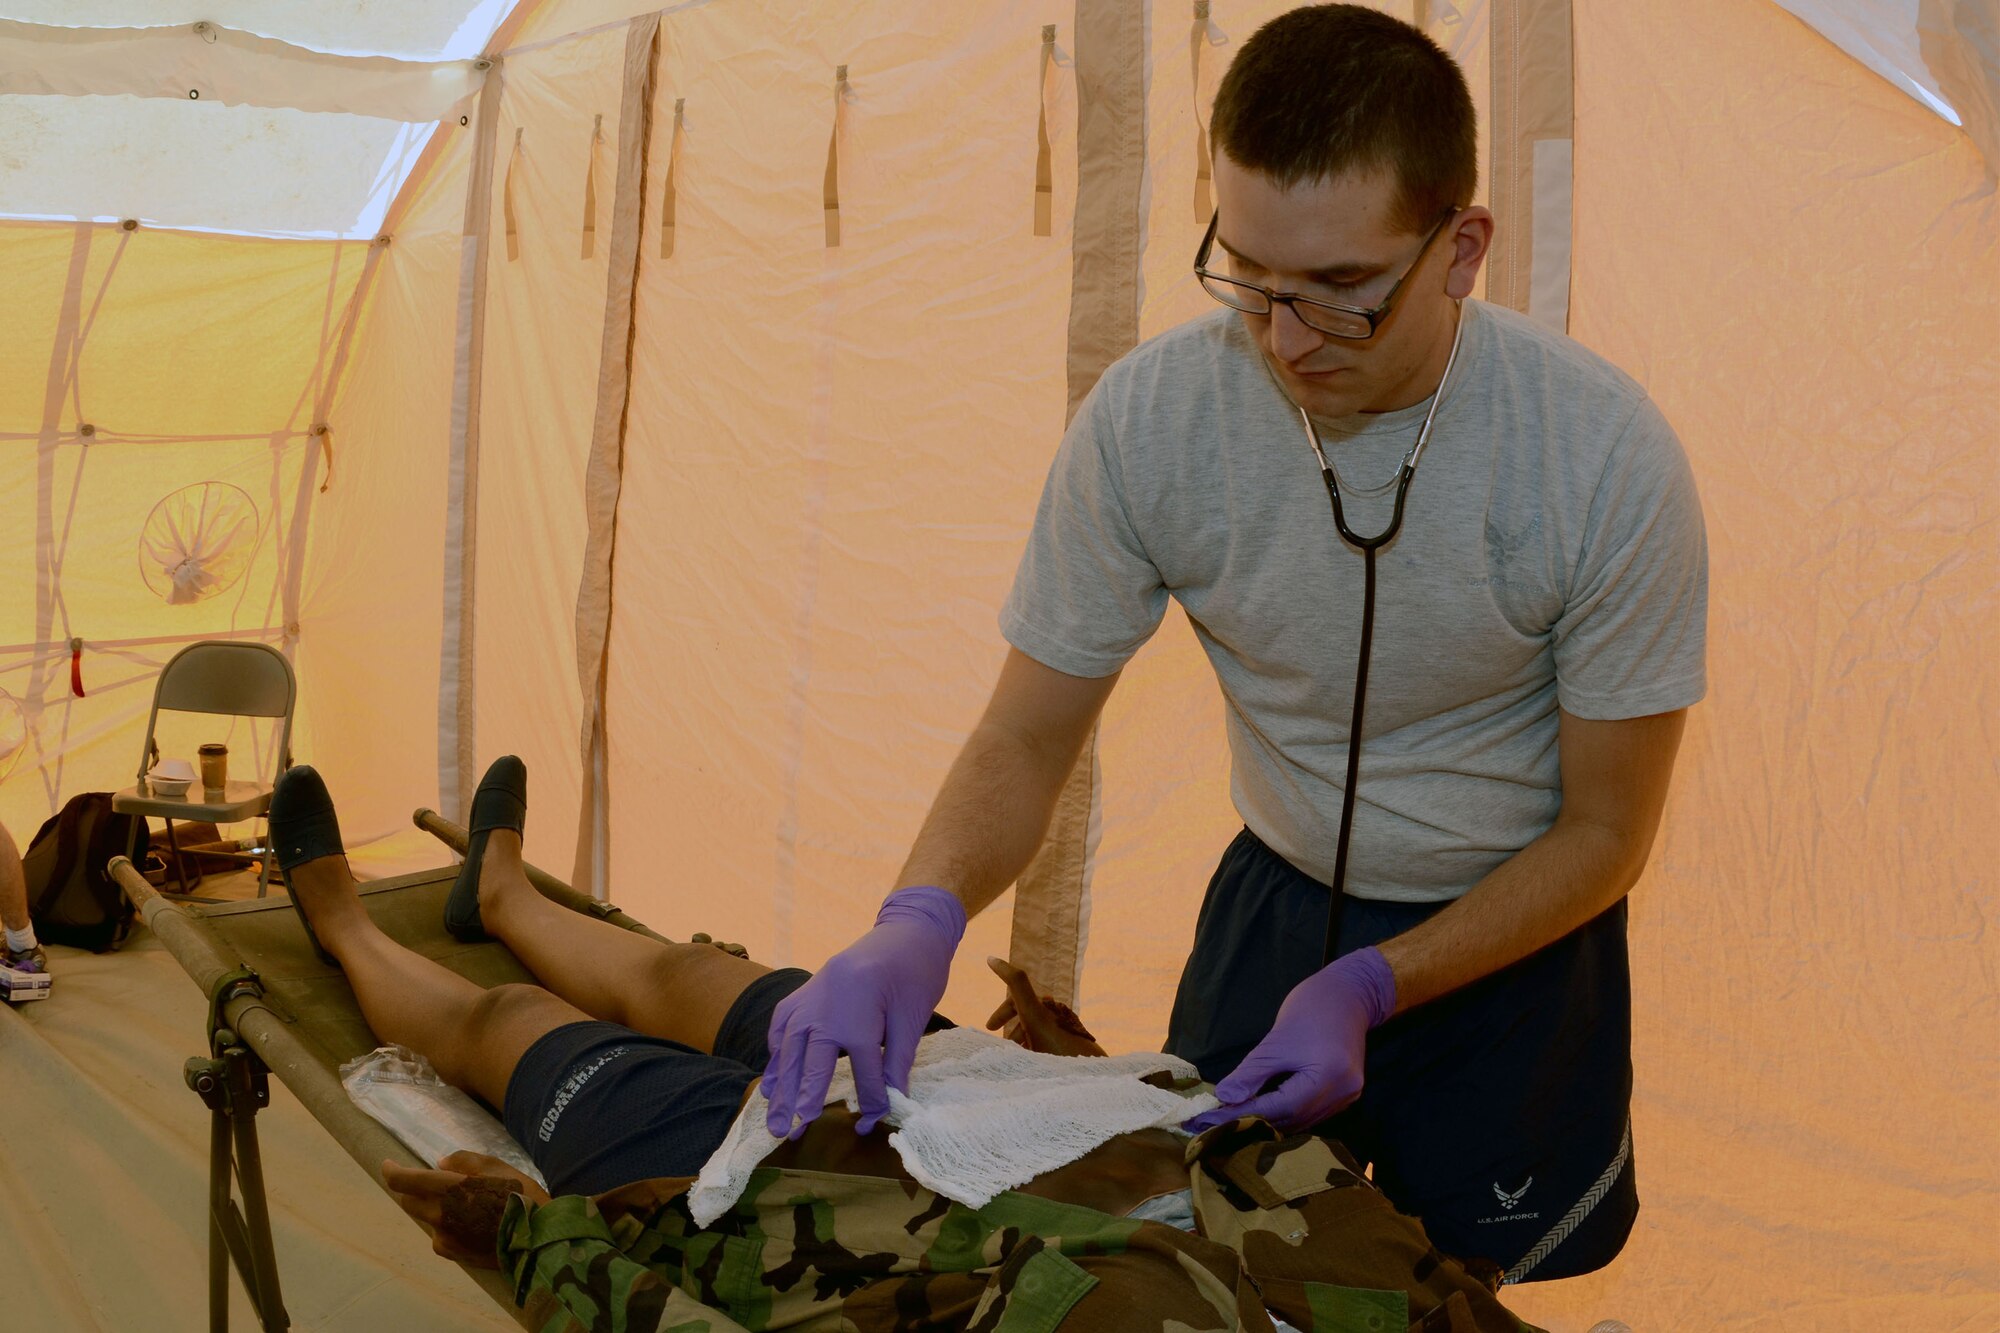 U.S. Air Force Senior Airman Zechariah Palmisano, an aerospace medic with the 169th Medical Group, applies gauze to a simulated patient during a mass casualty exercise at McEntire Joint National Guard Base, S.C., June 18, 2015. McEntire Joint National Guard Base simulated a vehicle collision on base to offer personnel real-world training should an event ever occur in a real world capacity. (South Carolina Air National Guard photo by Amn Megan Floyd/Released)